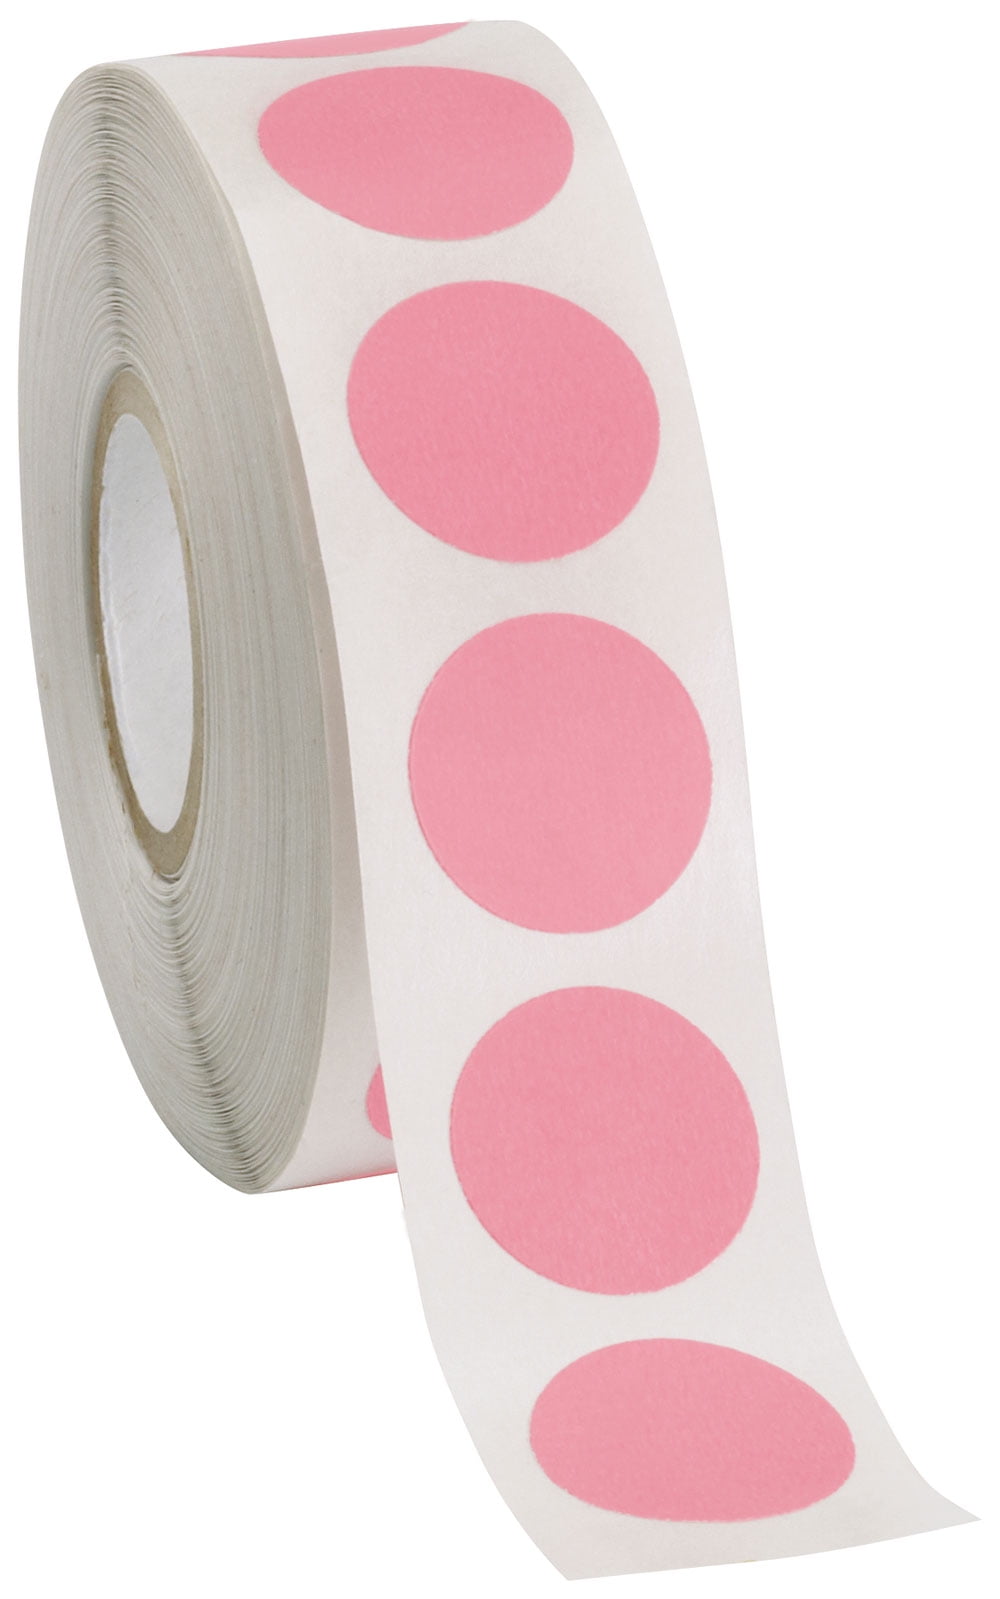 1000 PINK Self-Adhesive Price Labels 3/4" Stickers Tags Retail Store Supplies 